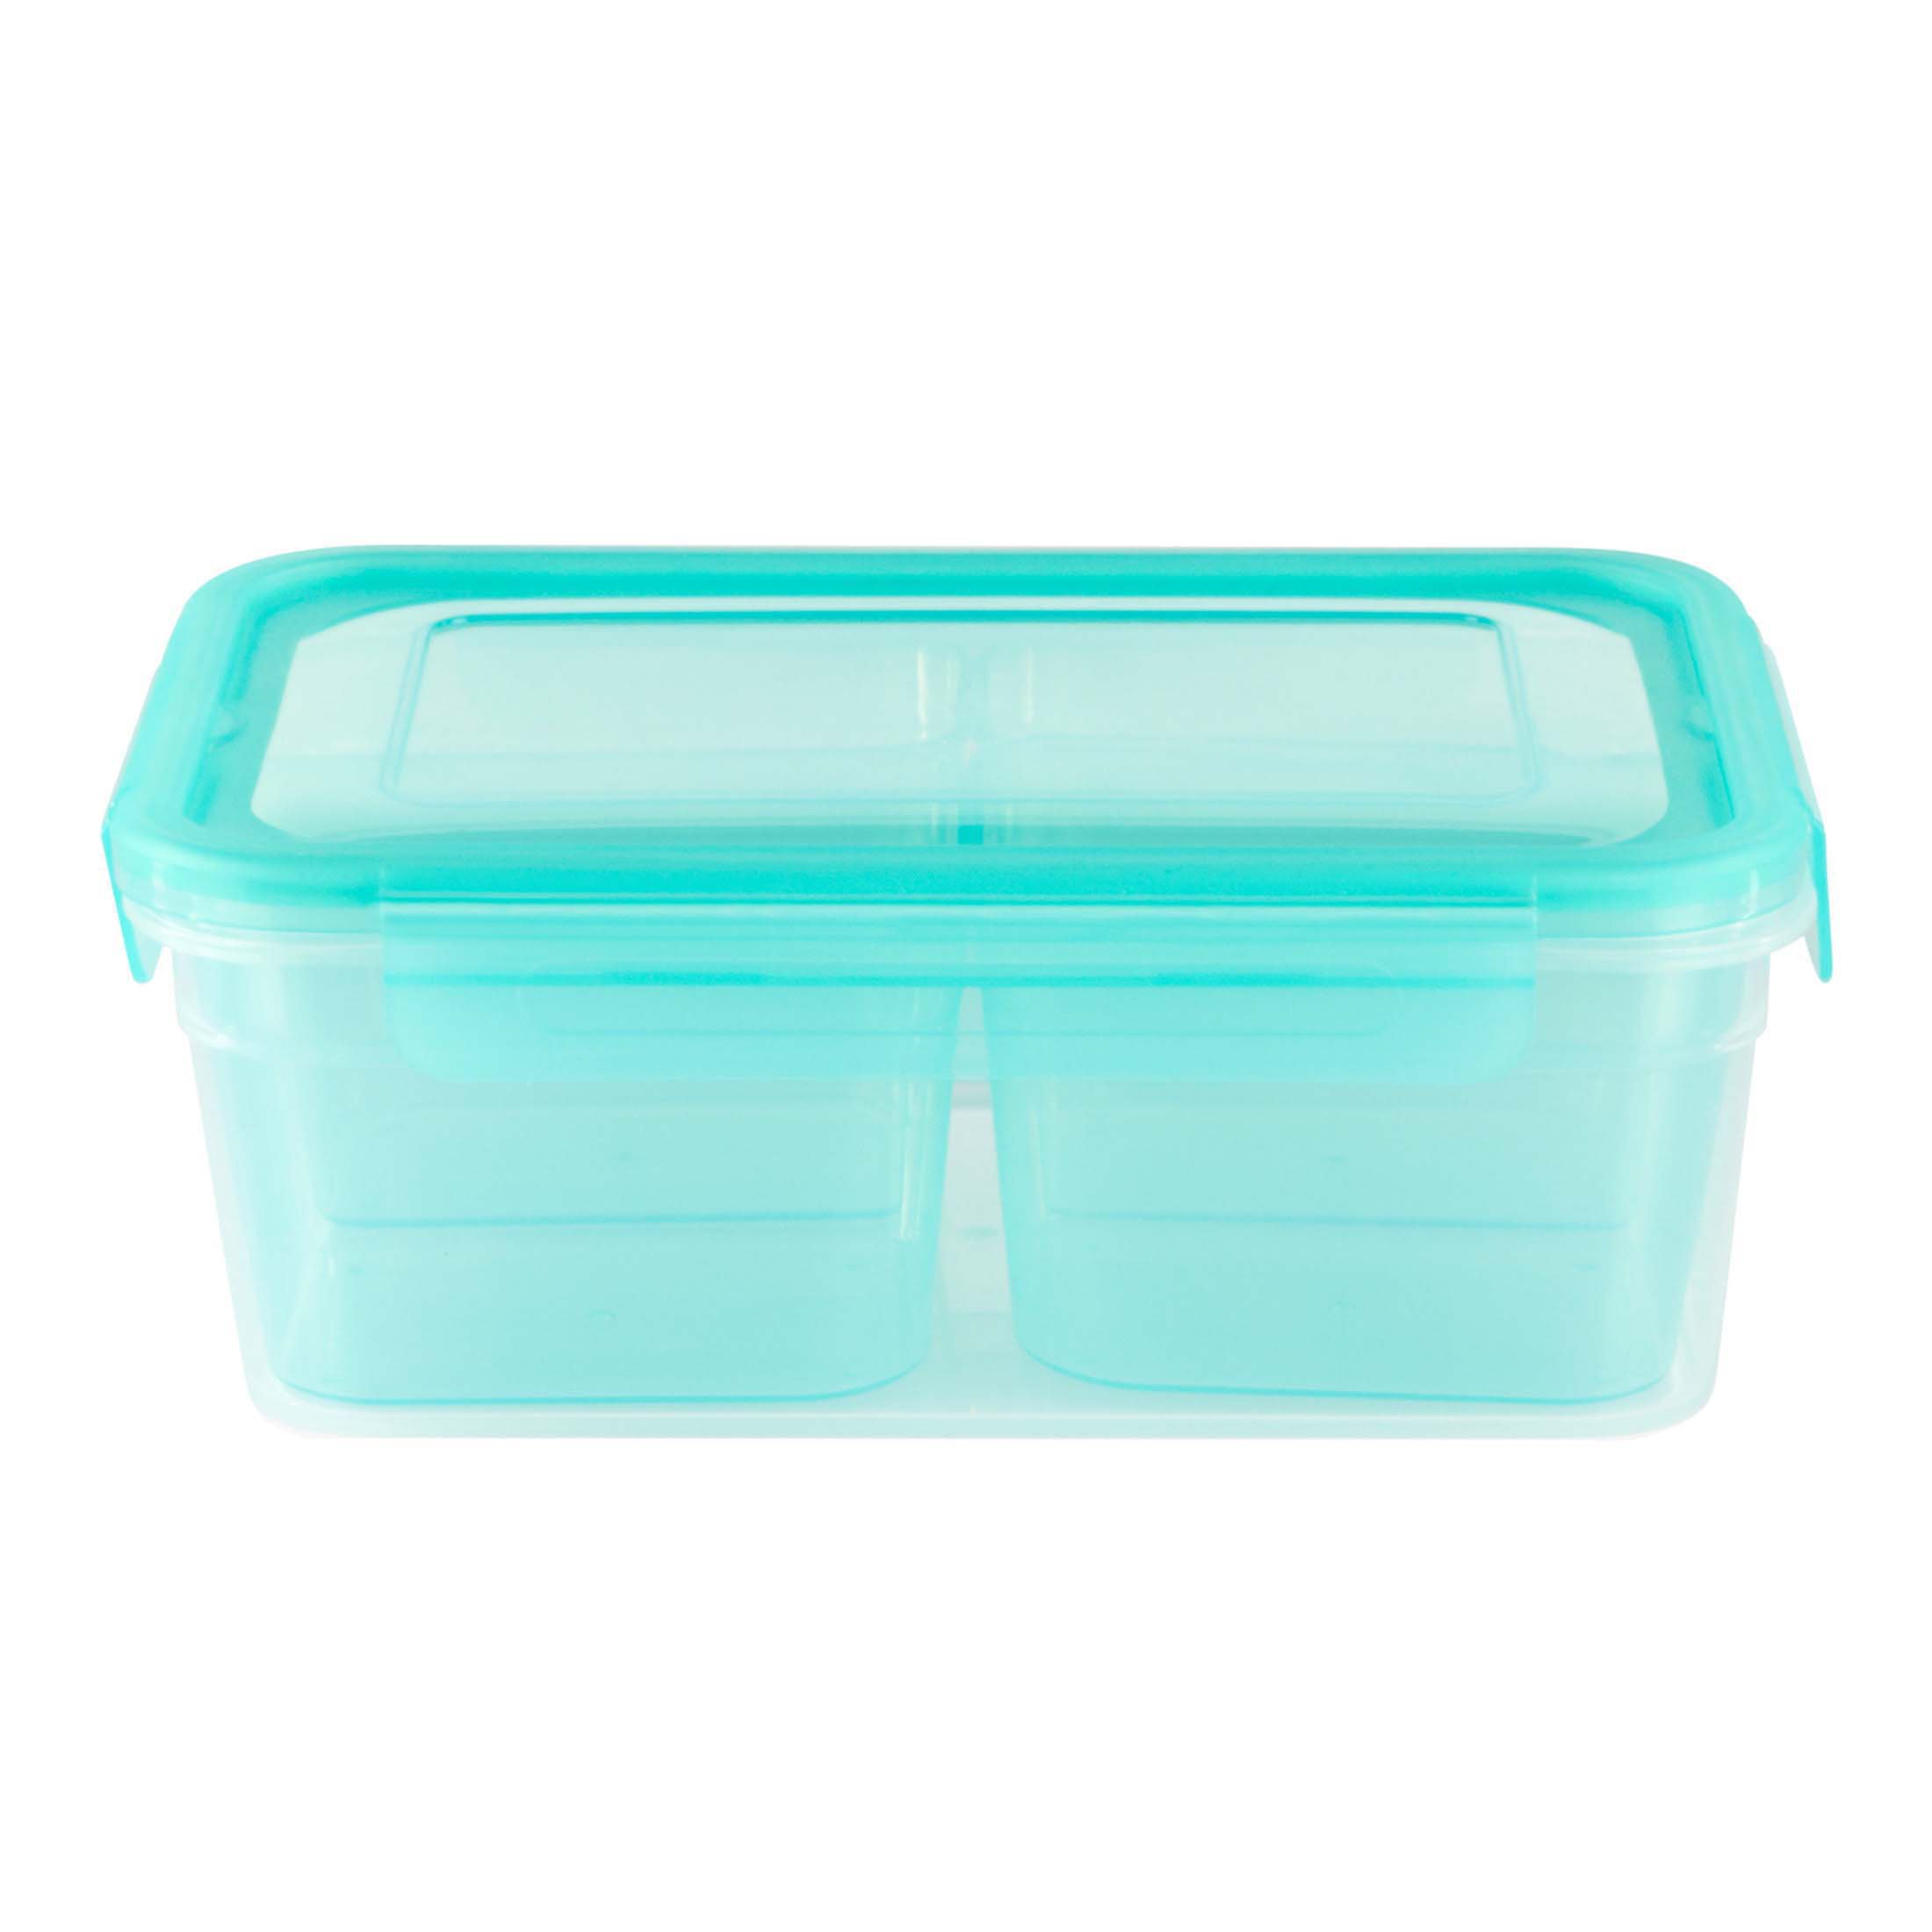 W&P 1-Cup 4-Cube Freezer Tray - Blue - Shop Food Storage at H-E-B